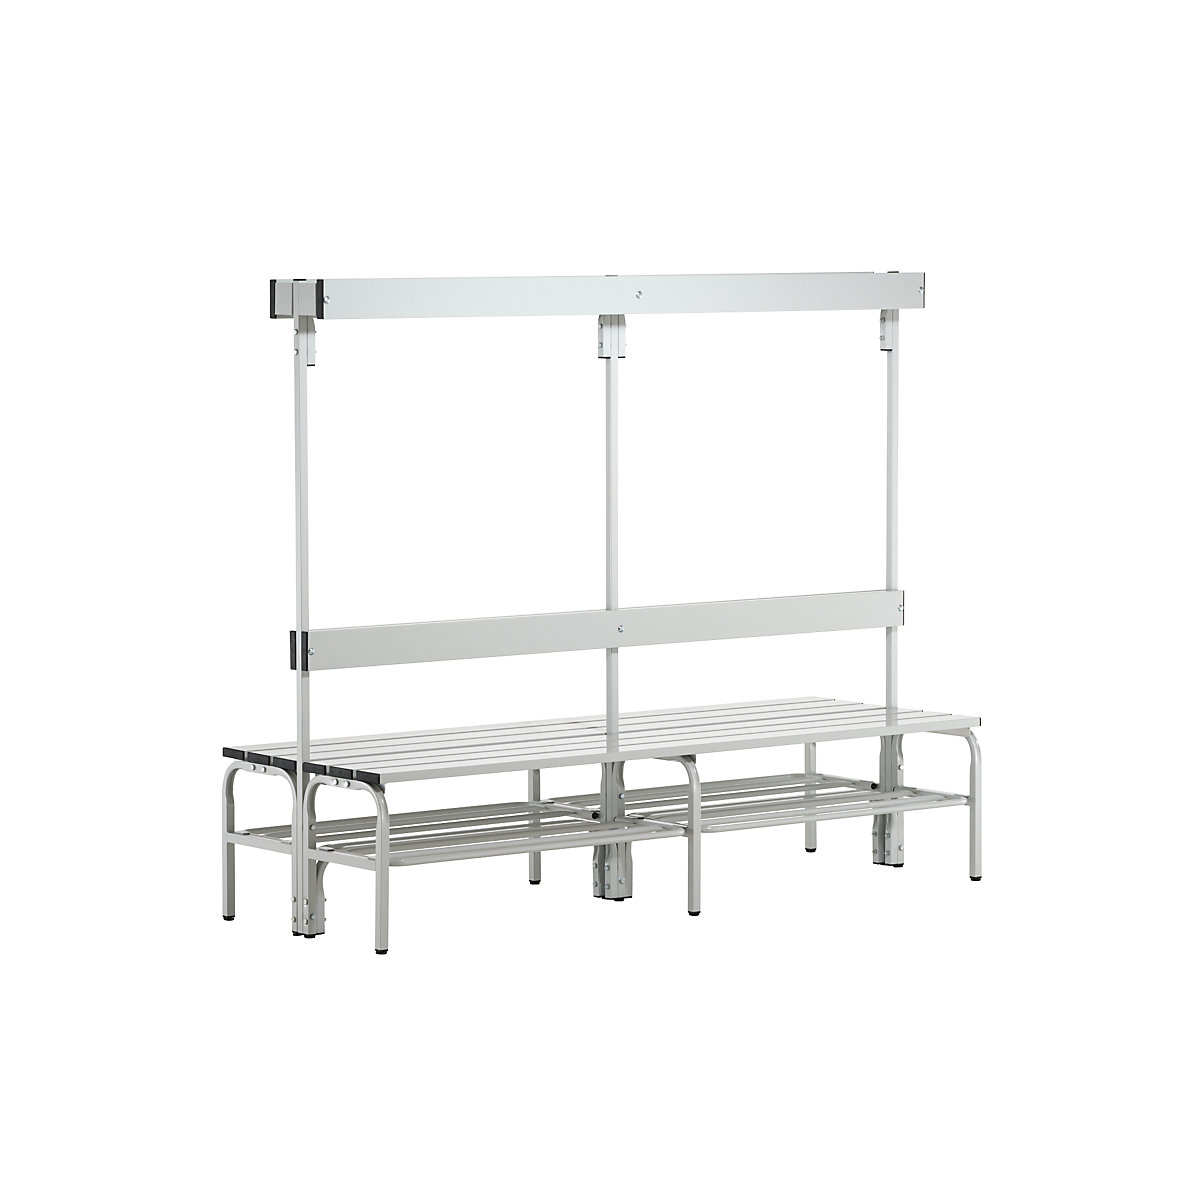 Sypro – Changing room bench with aluminium slats, HxD 1650 x 725 mm, double sided, length 1500 mm, 12 hooks, light grey, shoe rack